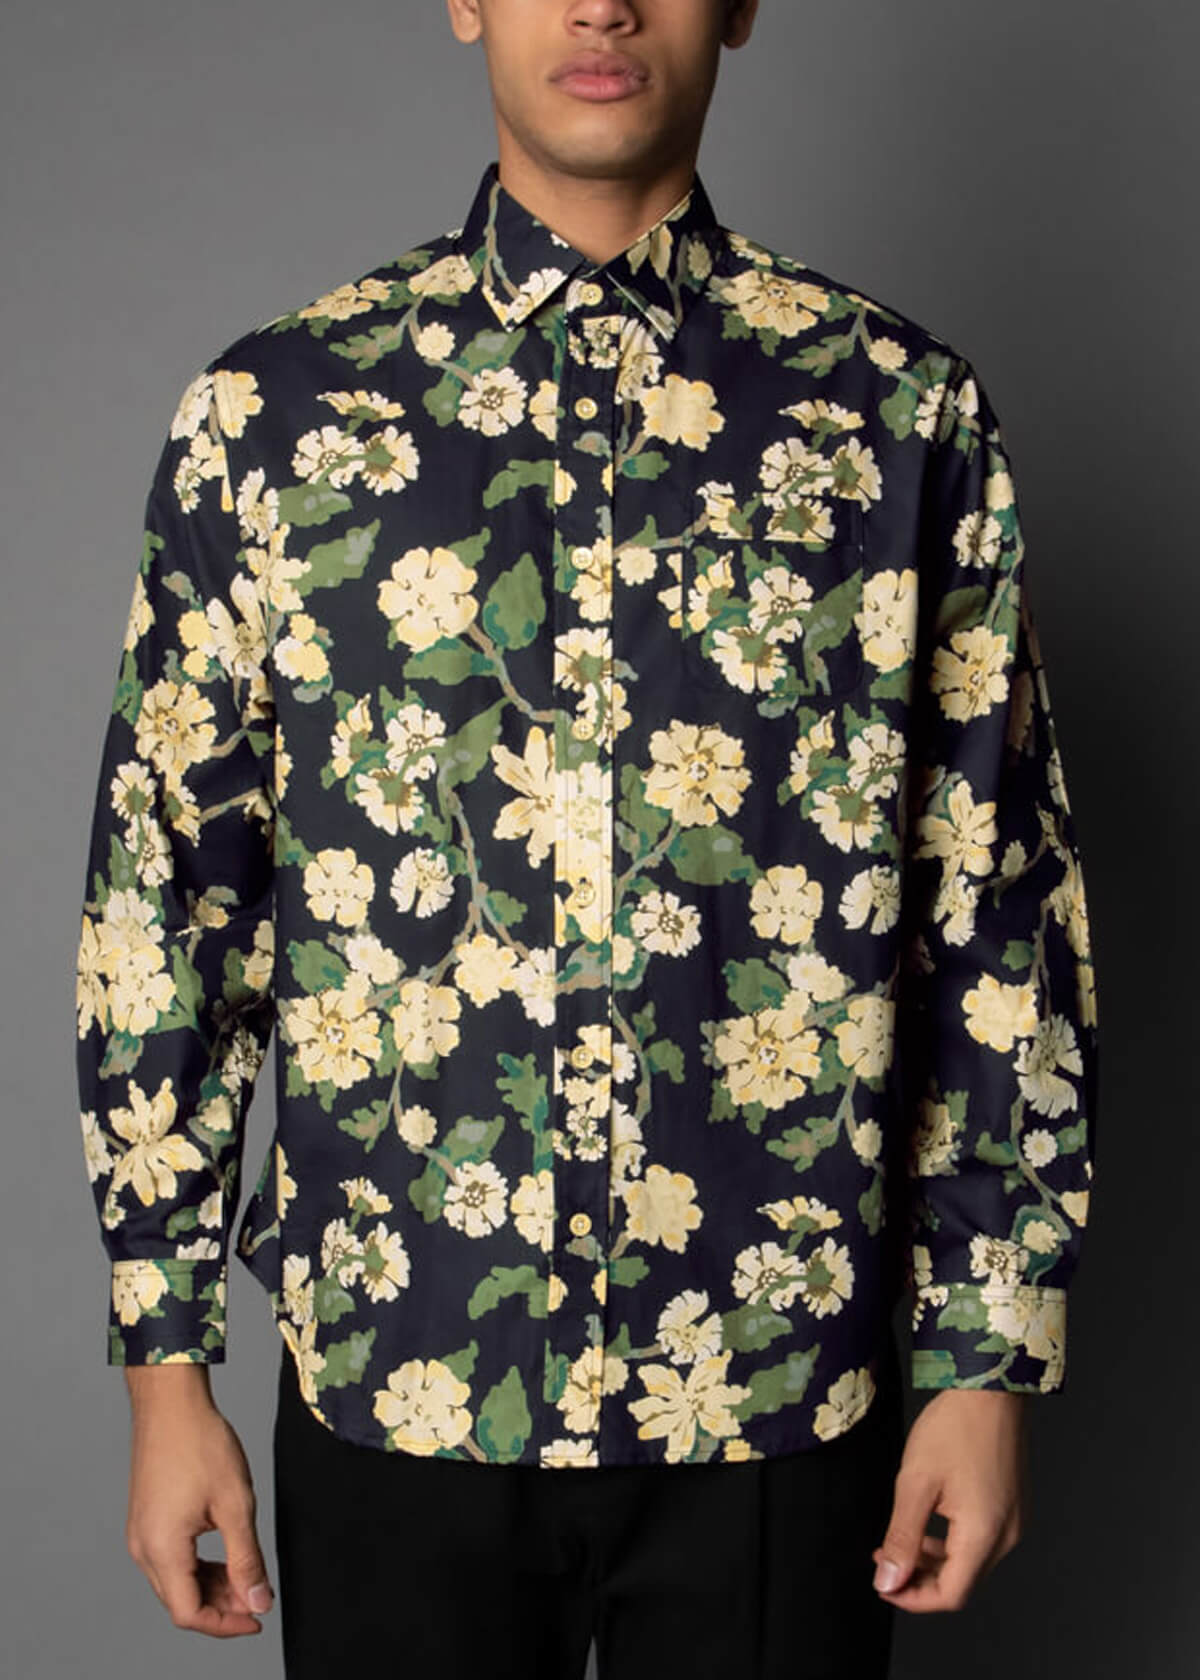 men's black shirt with yellow and green floral print